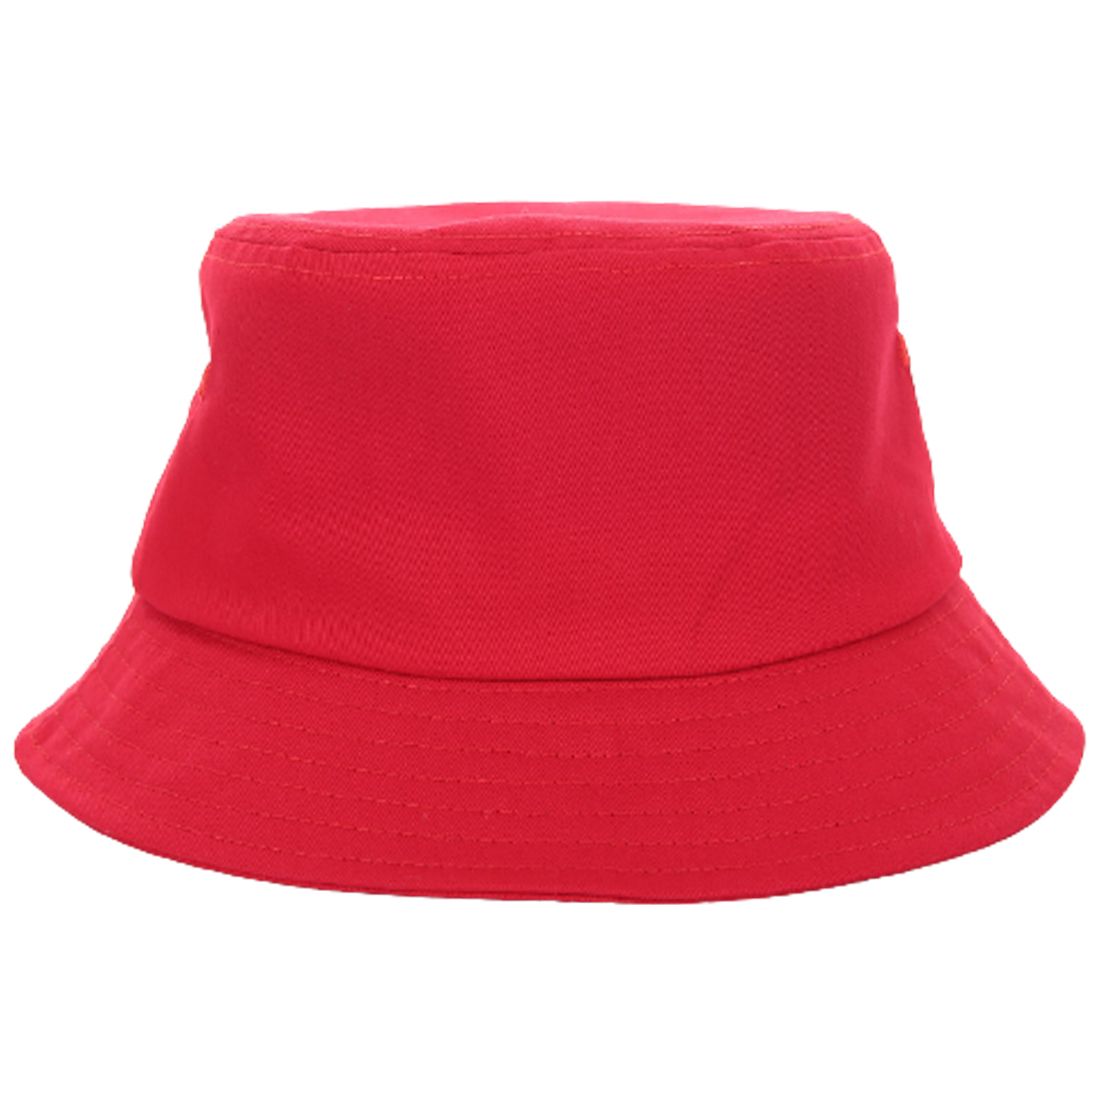 Promotional Cotton Twill Unstructured Bucket Hat